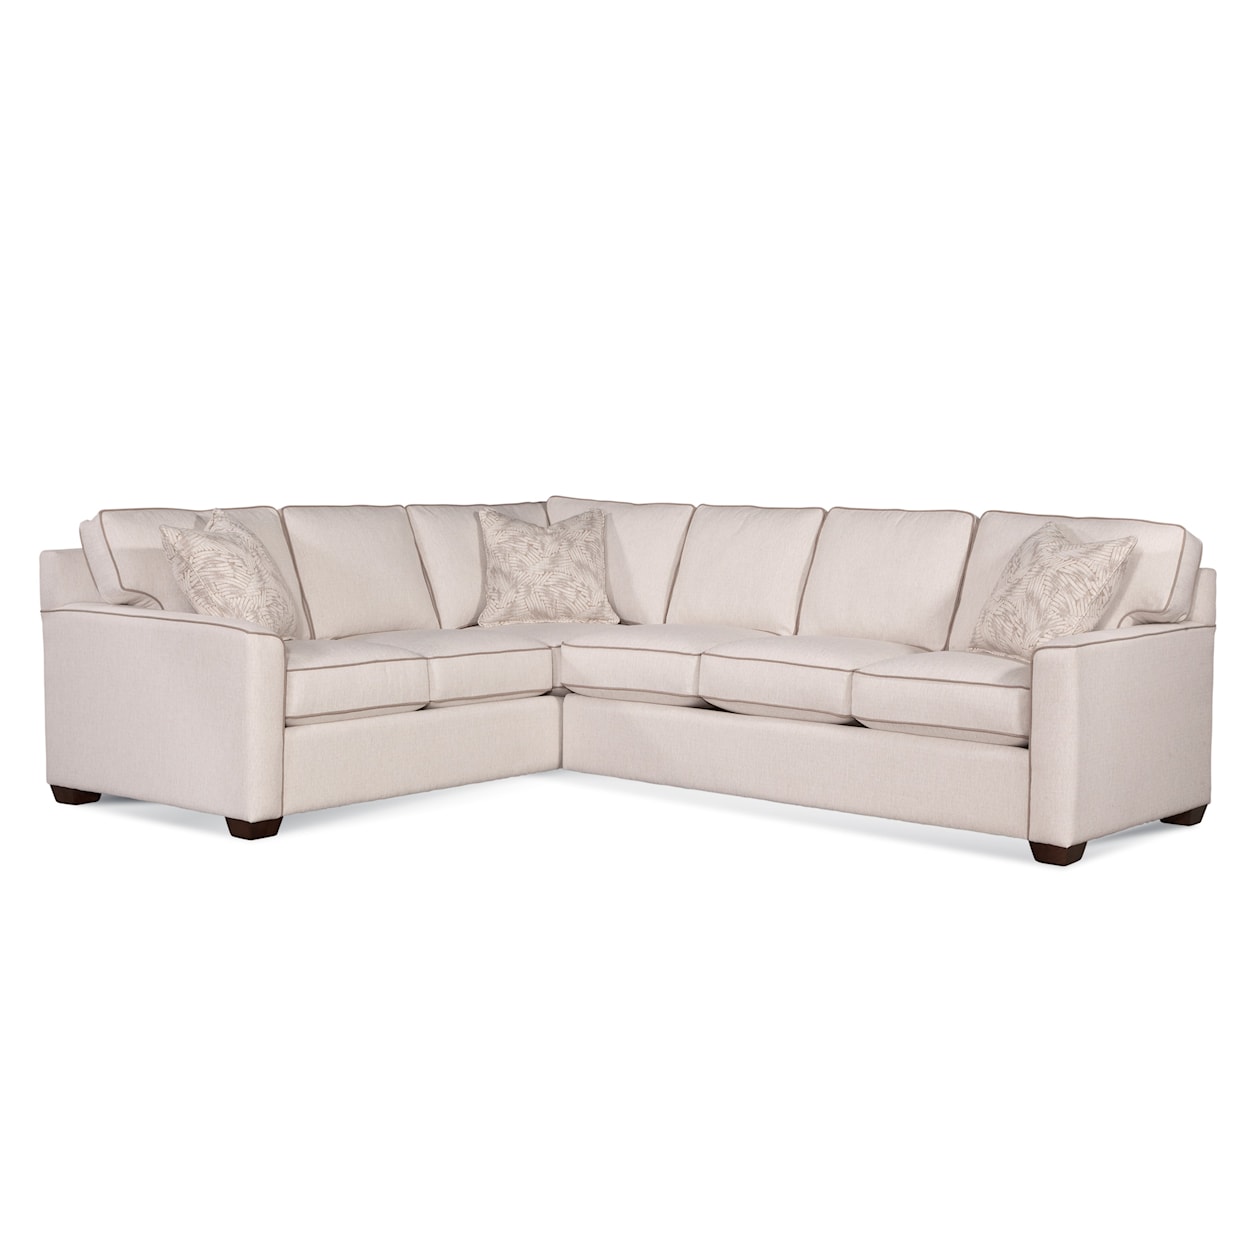 Braxton Culler Easton Easton Two Piece L Sleeper Sectional